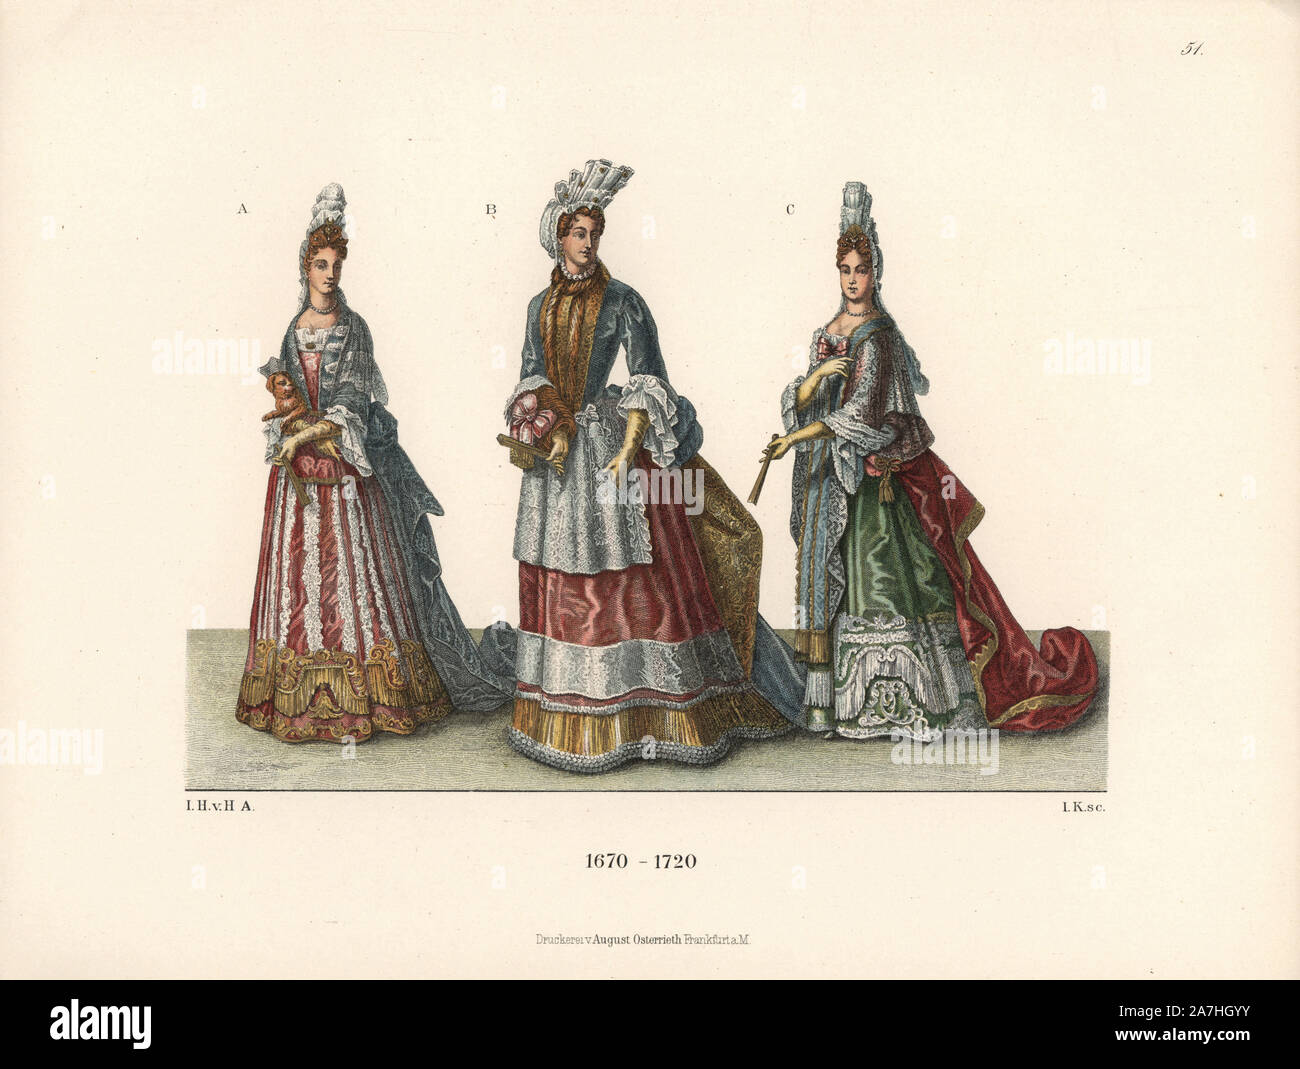 Noblewomen from the late 17th century from prints of the period. Archduchess of Austria, daughter of Leopold I (B), and French courtiers from the court of King Louis XIV. Chromolithograph from Hefner-Alteneck's 'Costumes, Artworks and Appliances from the Middle Ages to the 18th Century,' Frankfurt, 1889. Illustration by Dr. Jakob Heinrich von Hefner-Alteneck, lithograph by Joh. Klipphahn and published by Heinrich Keller. Dr. Hefner-Alteneck (1811 - 1903) was a German curator, archaeologist, art historian, illustrator and etcher. Stock Photo